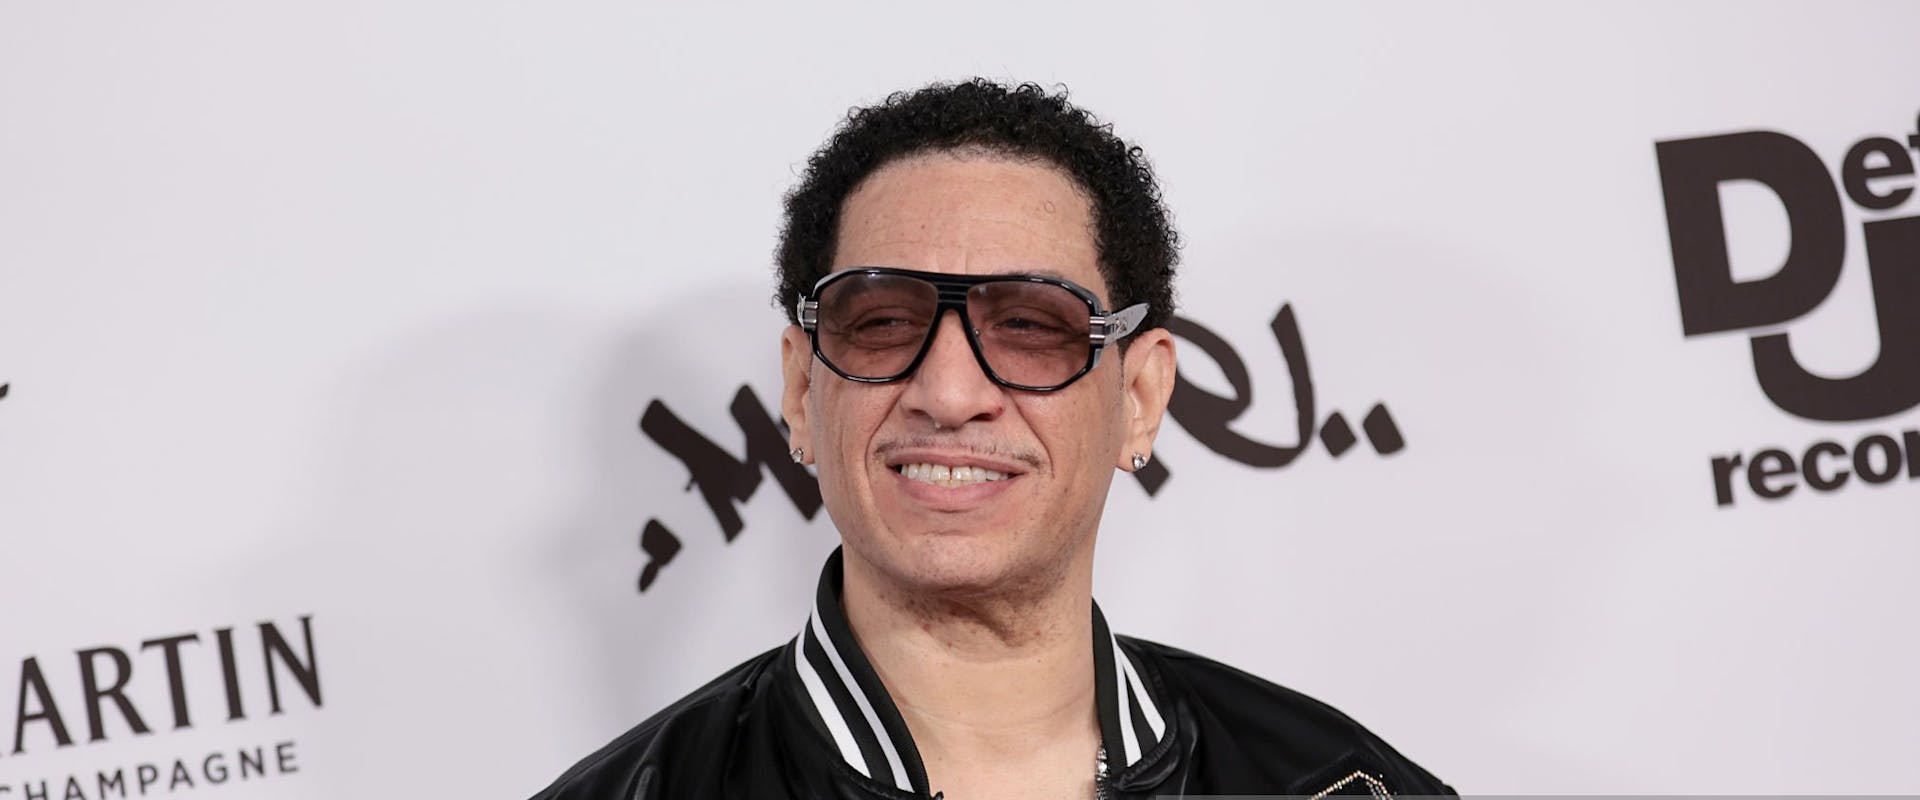 Kid Capri attends as Tribeca and Universal Music Group host the world premiere of Mixtape-Presented By Remy Martin on April 07, 2022 in New York City. (Photo by Dimitrios Kambouris/Getty Images for Tribeca Enterprises)